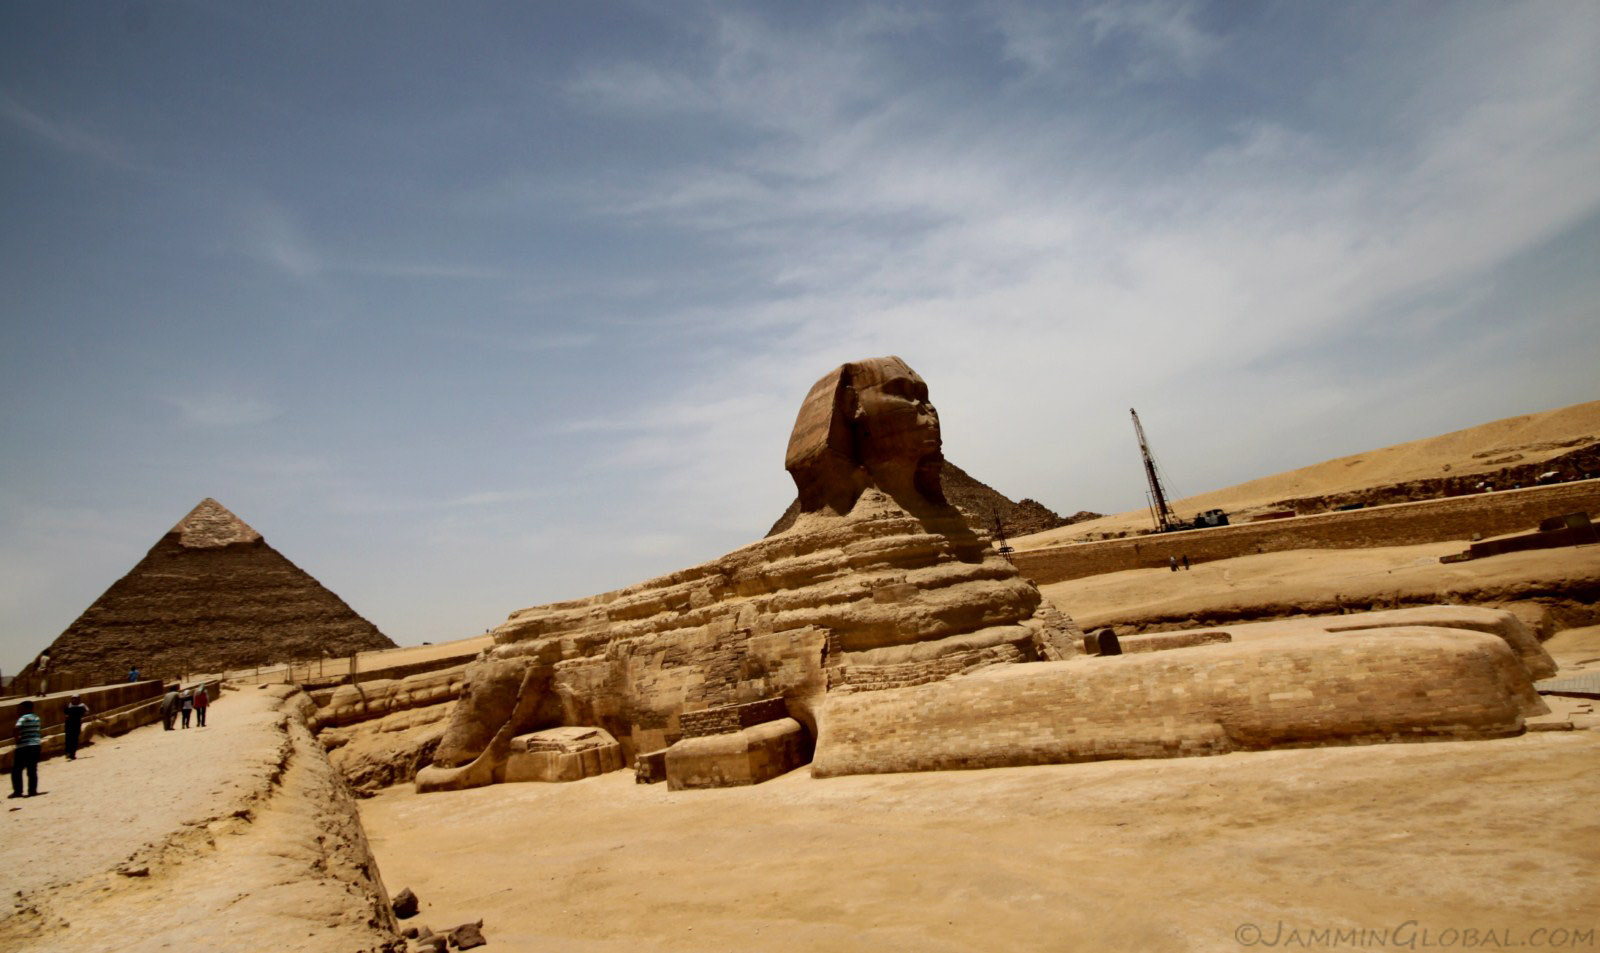 The Great Sphinx & the Pyramids of Giza